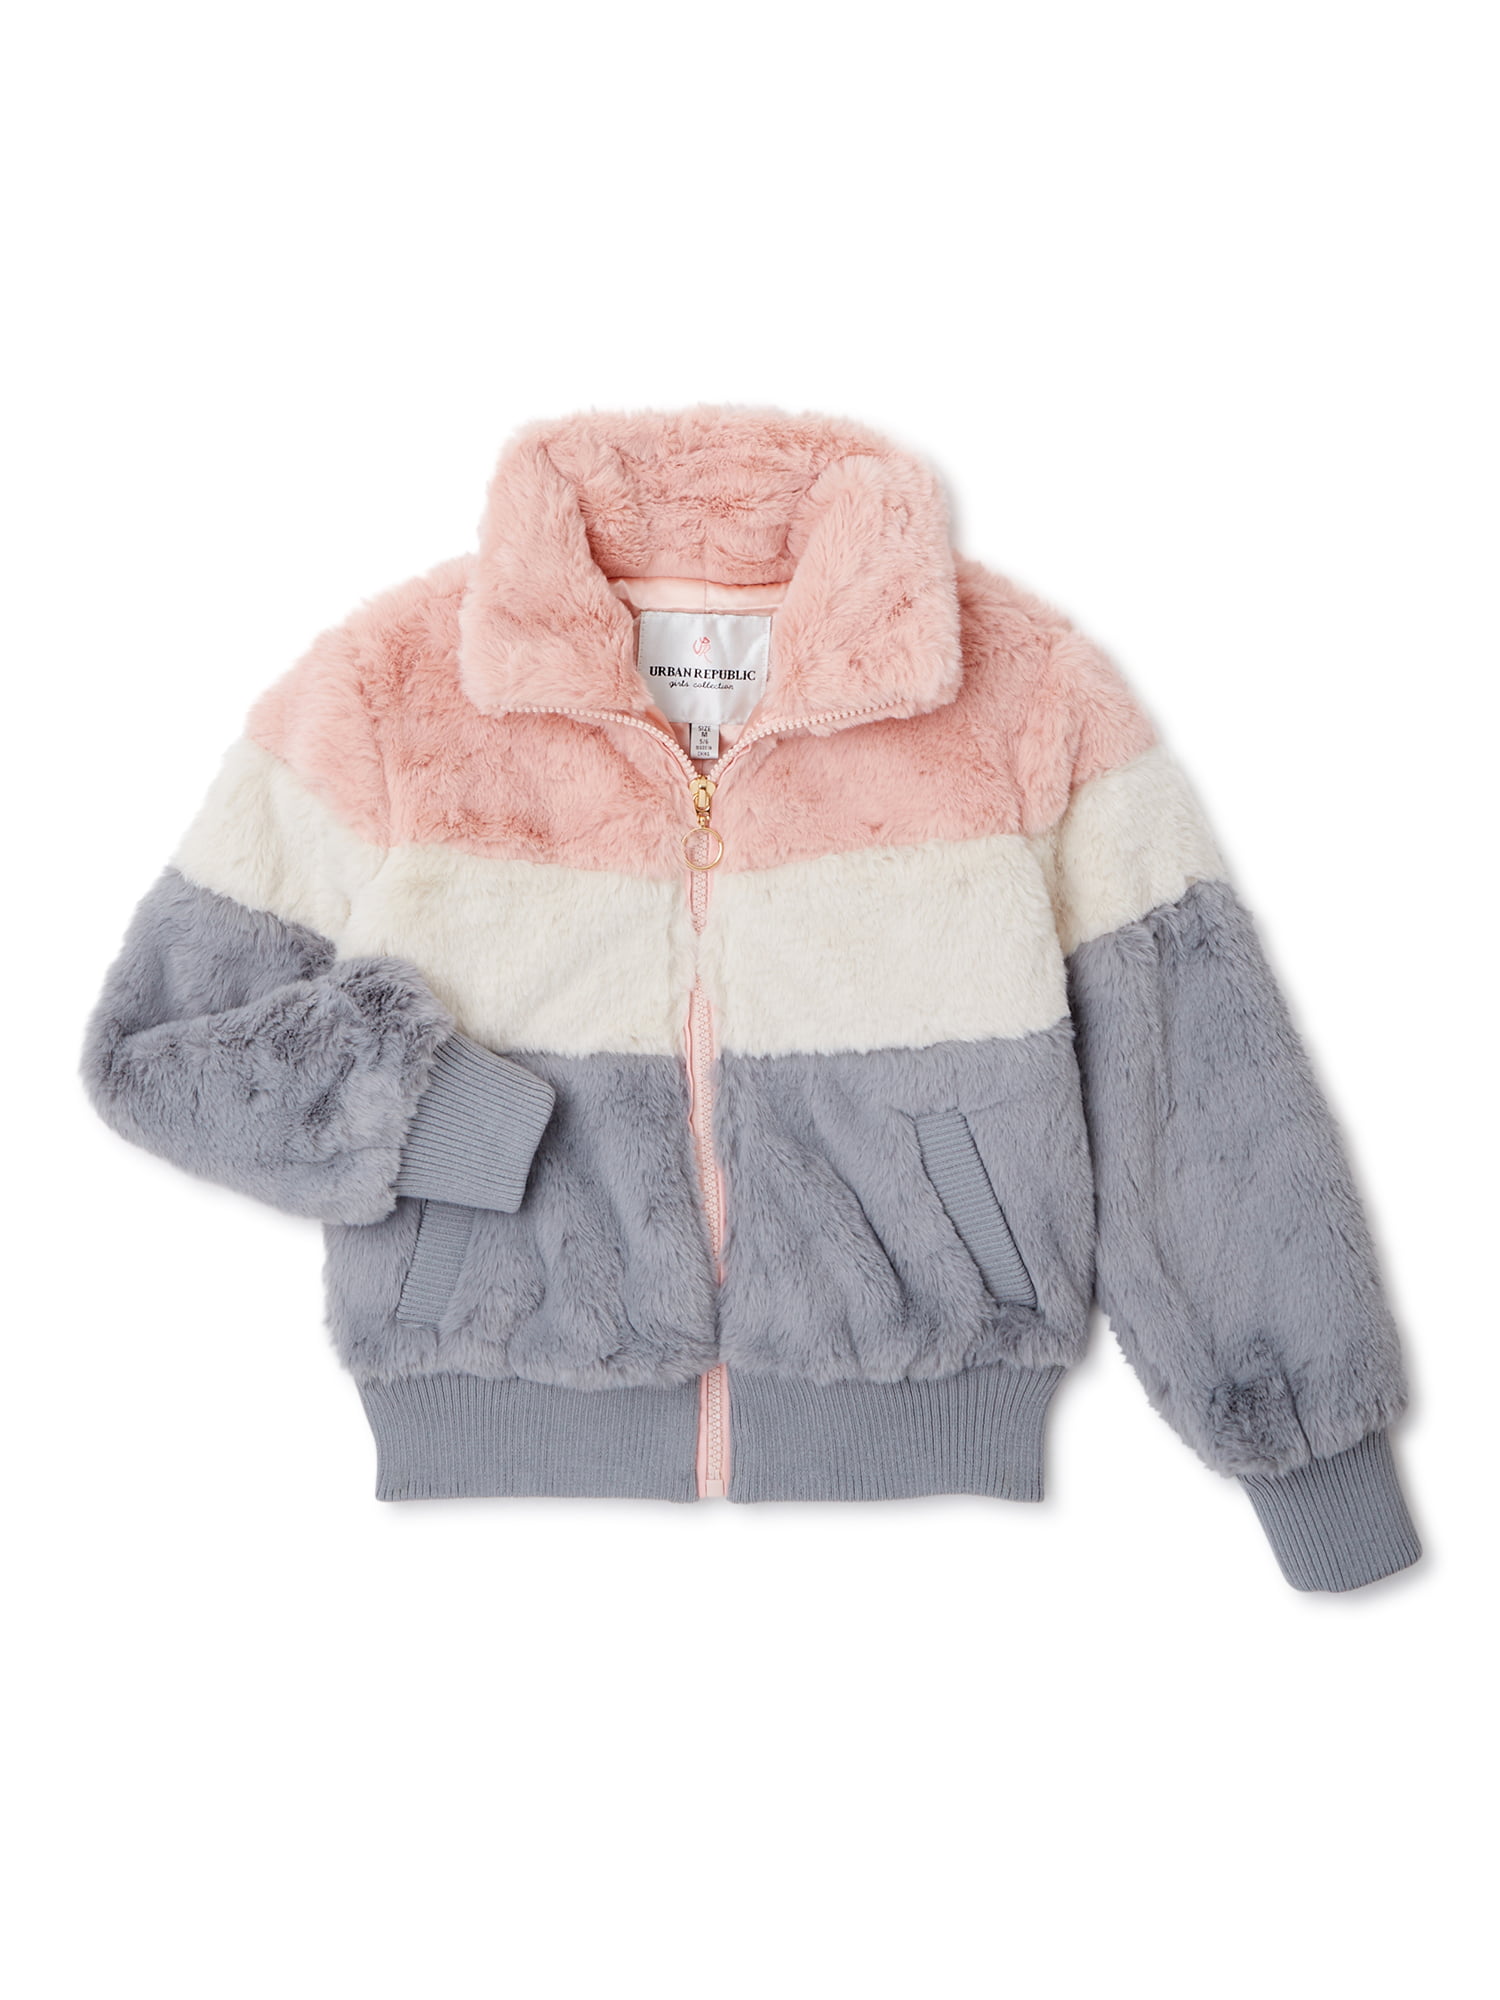 Limited Too girls Fuzzy Fur Bomber